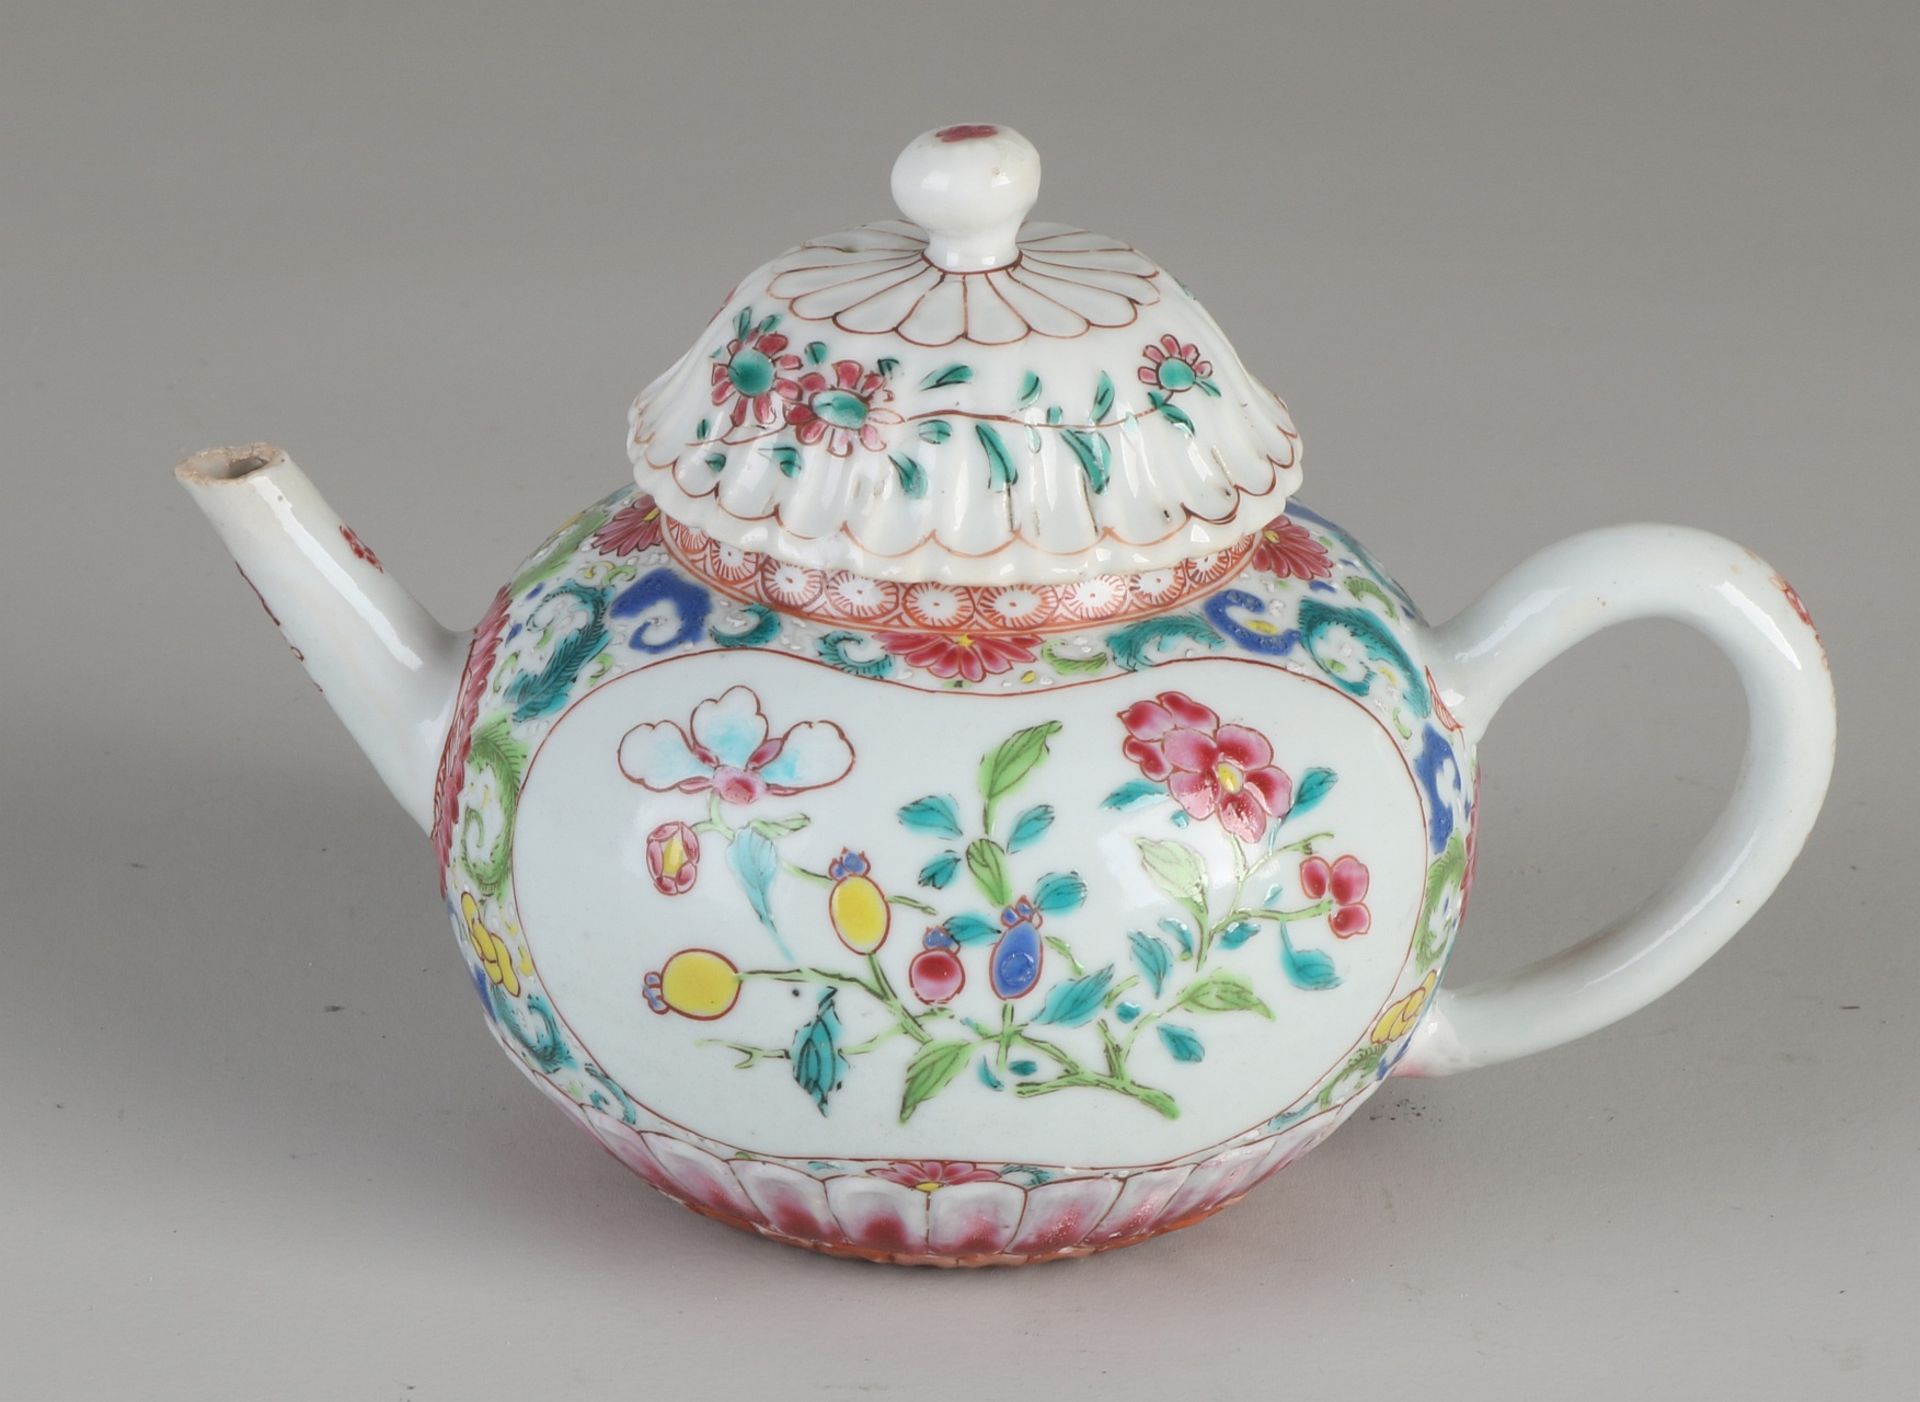 18th Century Family Rose teapot - Image 2 of 3